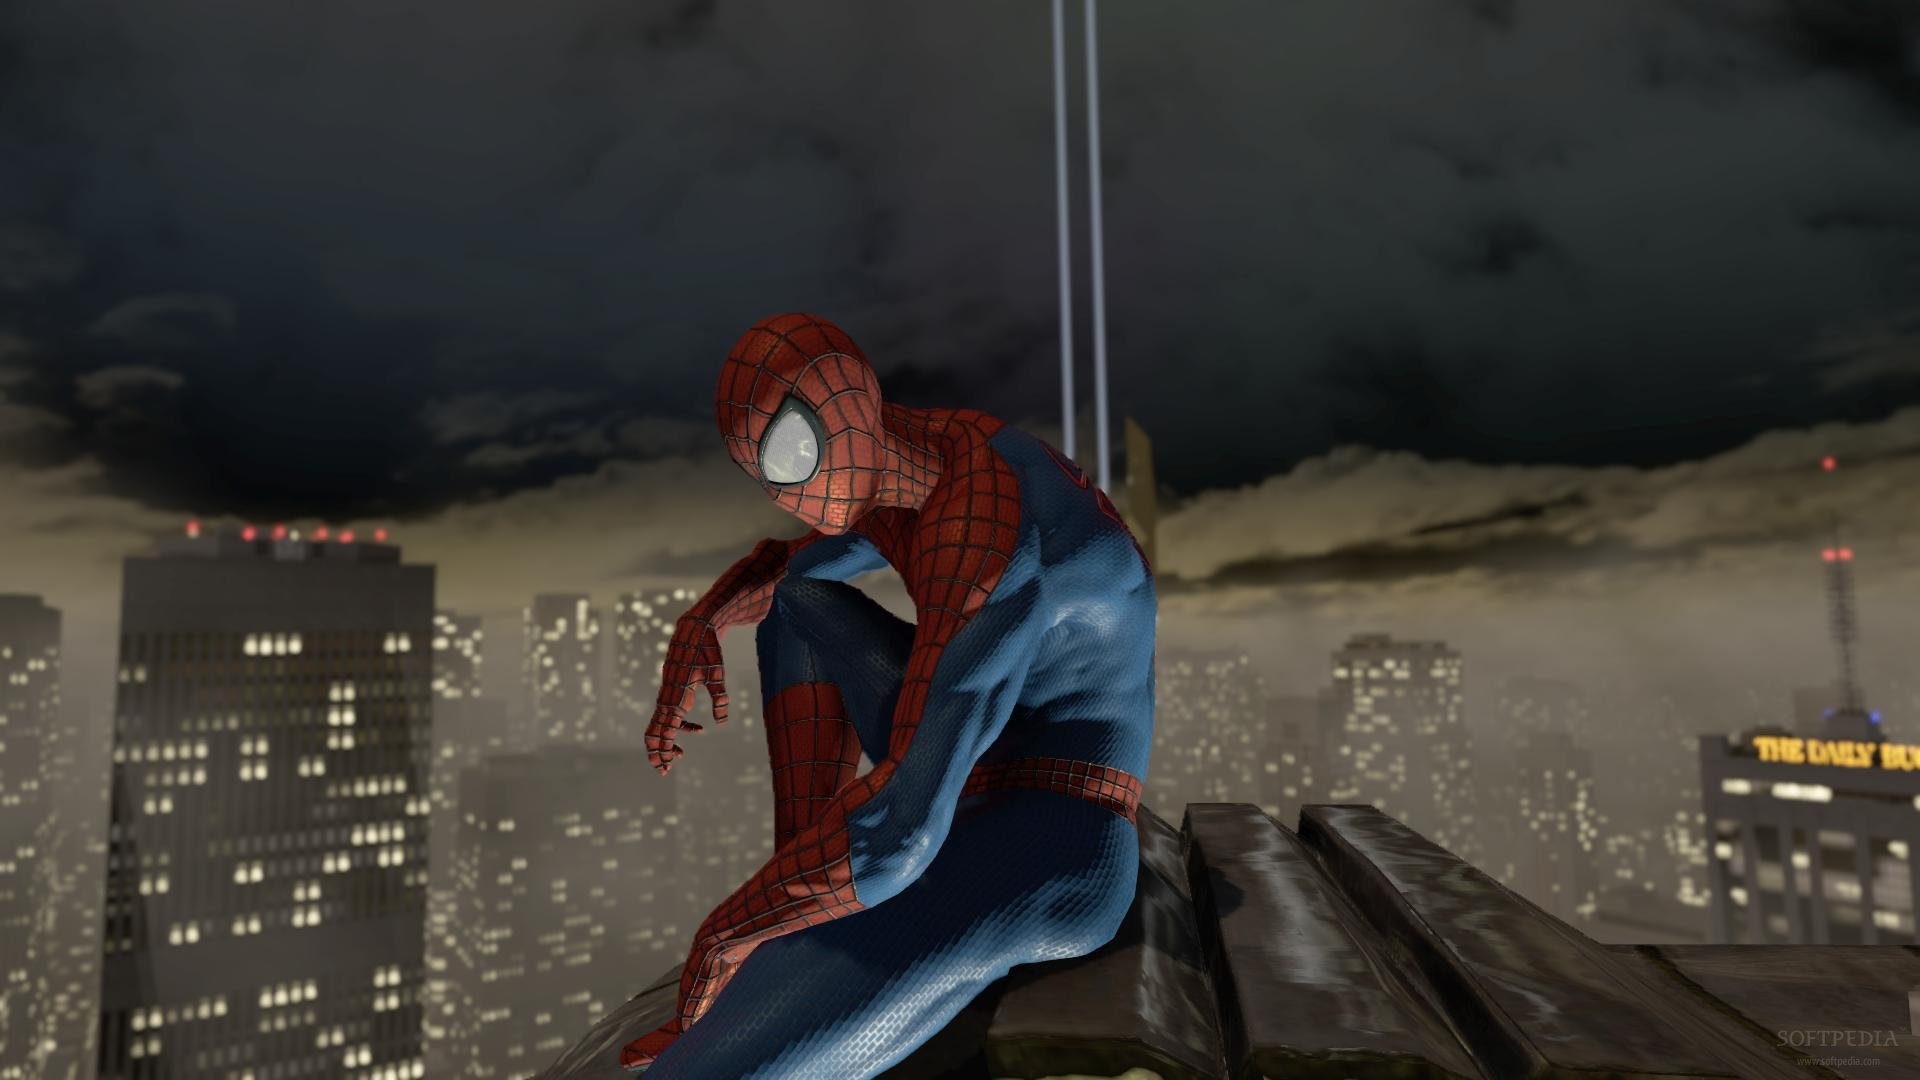 the amazing spider man game download for pc highly compressed